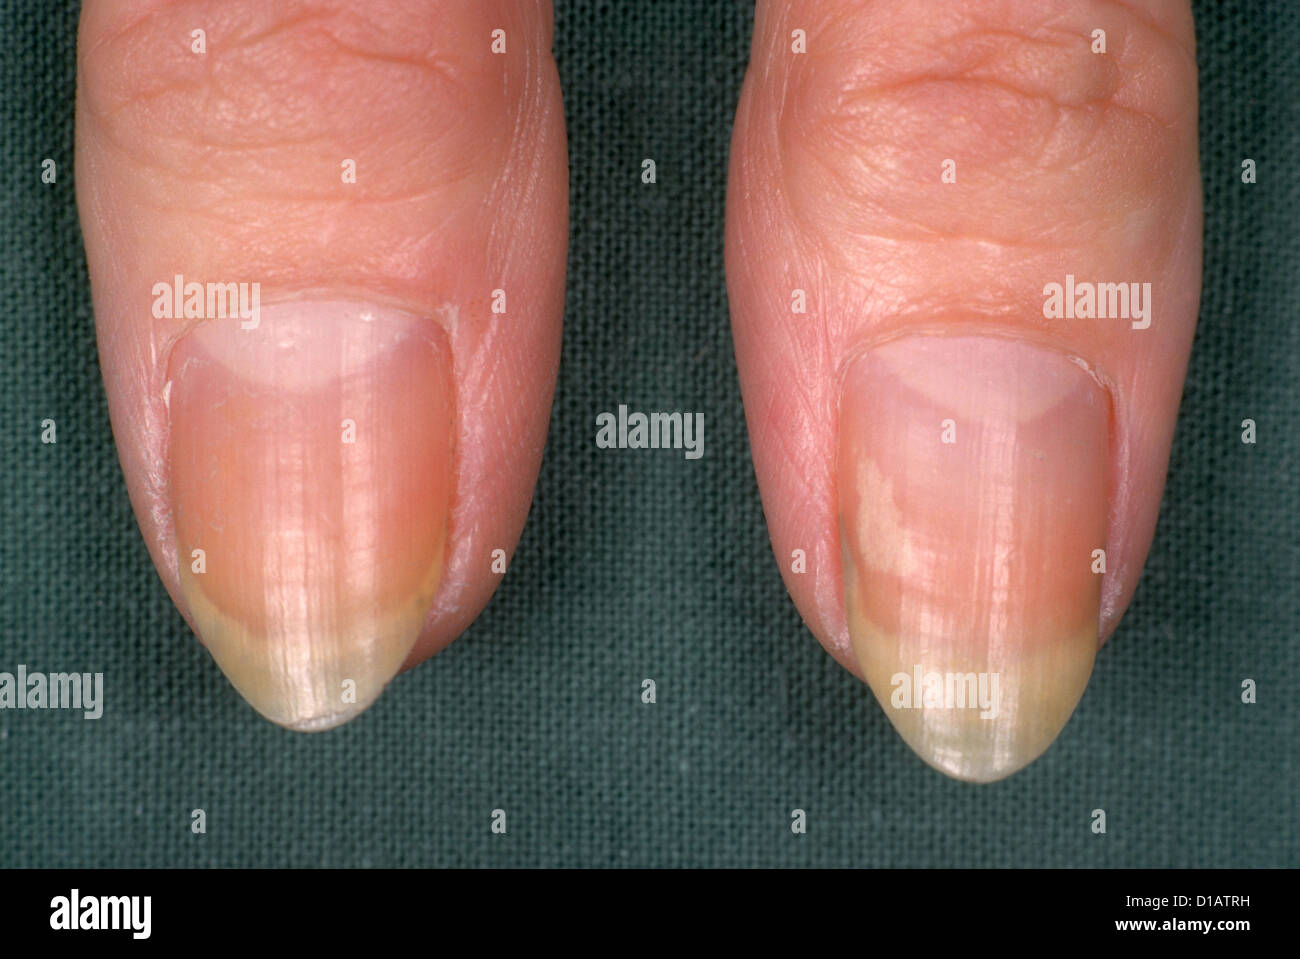 A Case of Twenty Nail Dystrophy and Review of Treatment Options